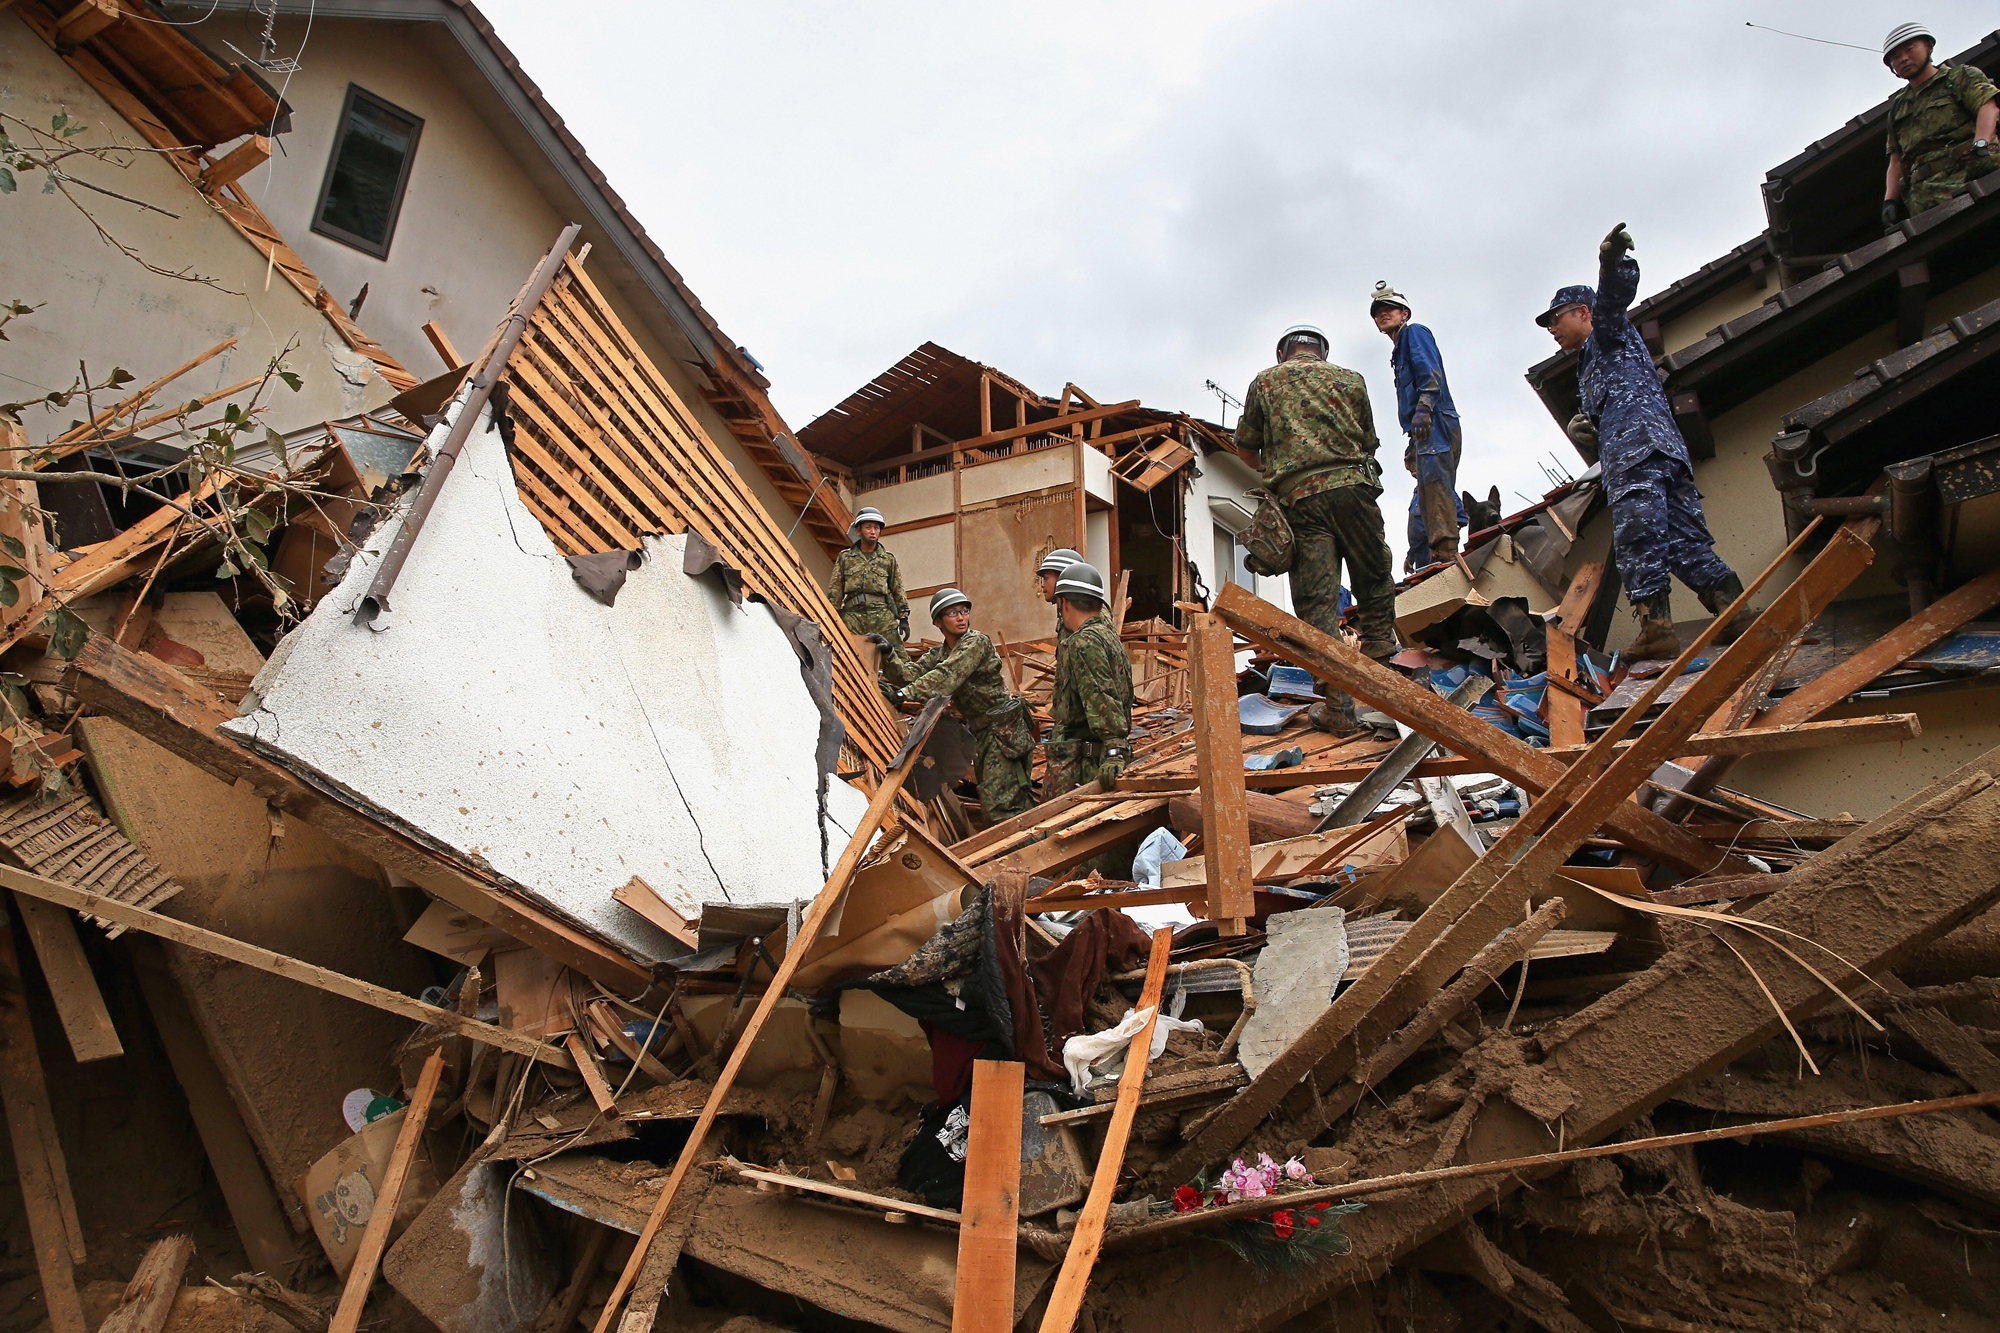 Japan Ground Self-Defense Force members conduct rescue operations at a destroyed house after landslides on Aug. 20, 2014 in Hiroshima, Japan.